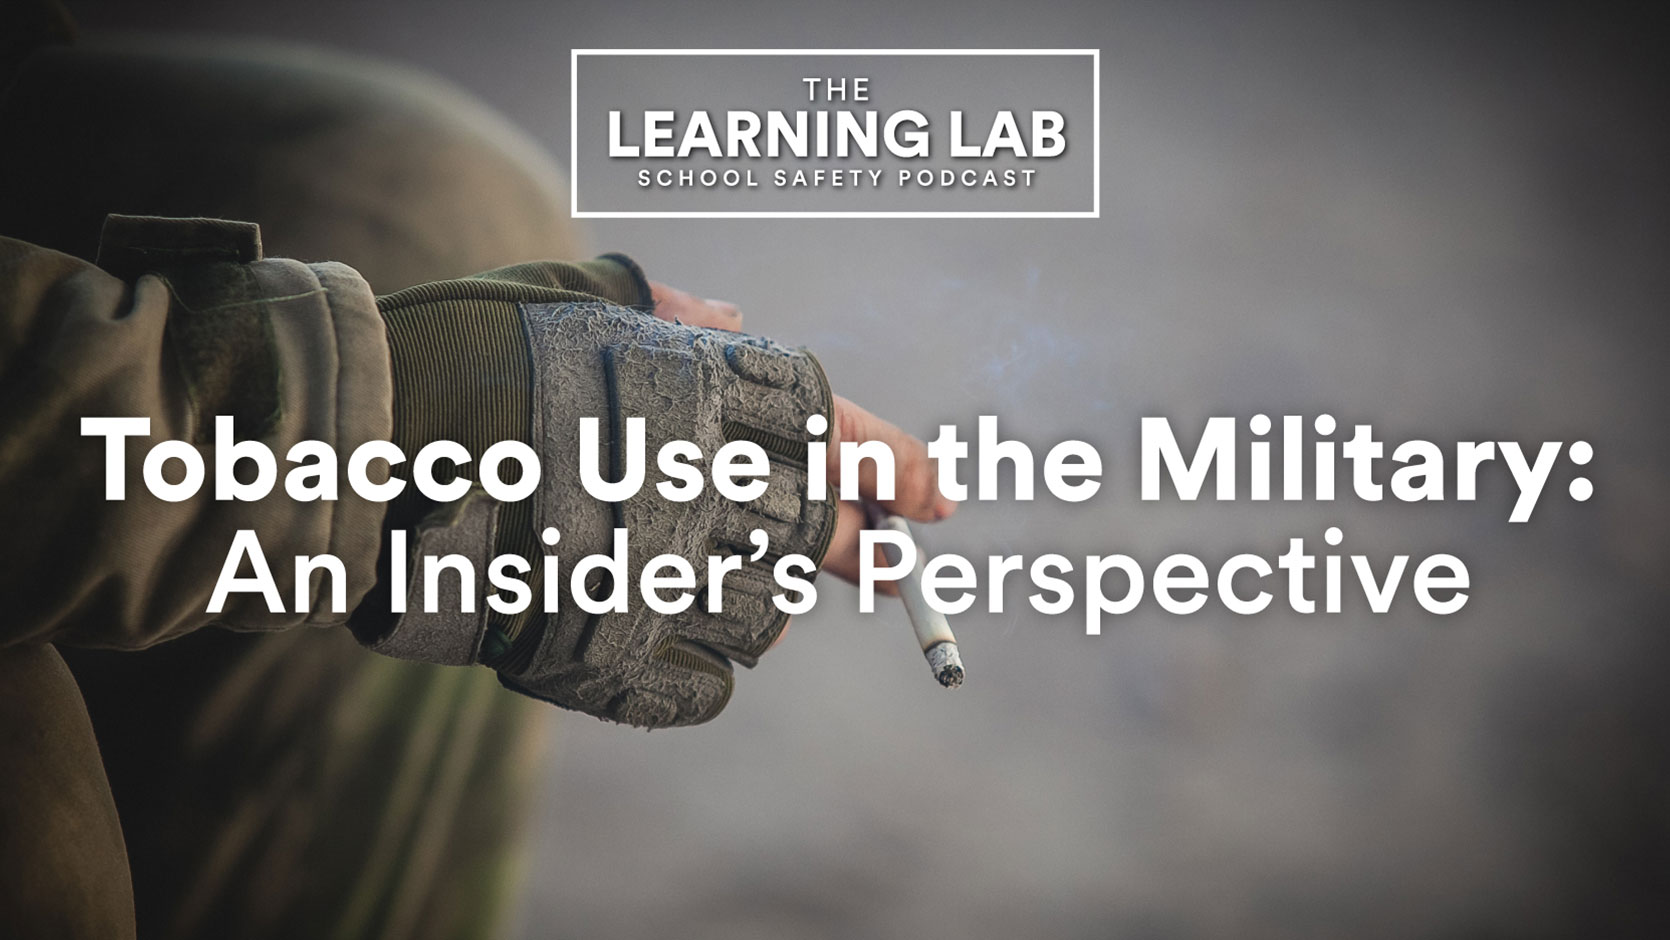 Tobacco Use in the military: An Insider's Perspective